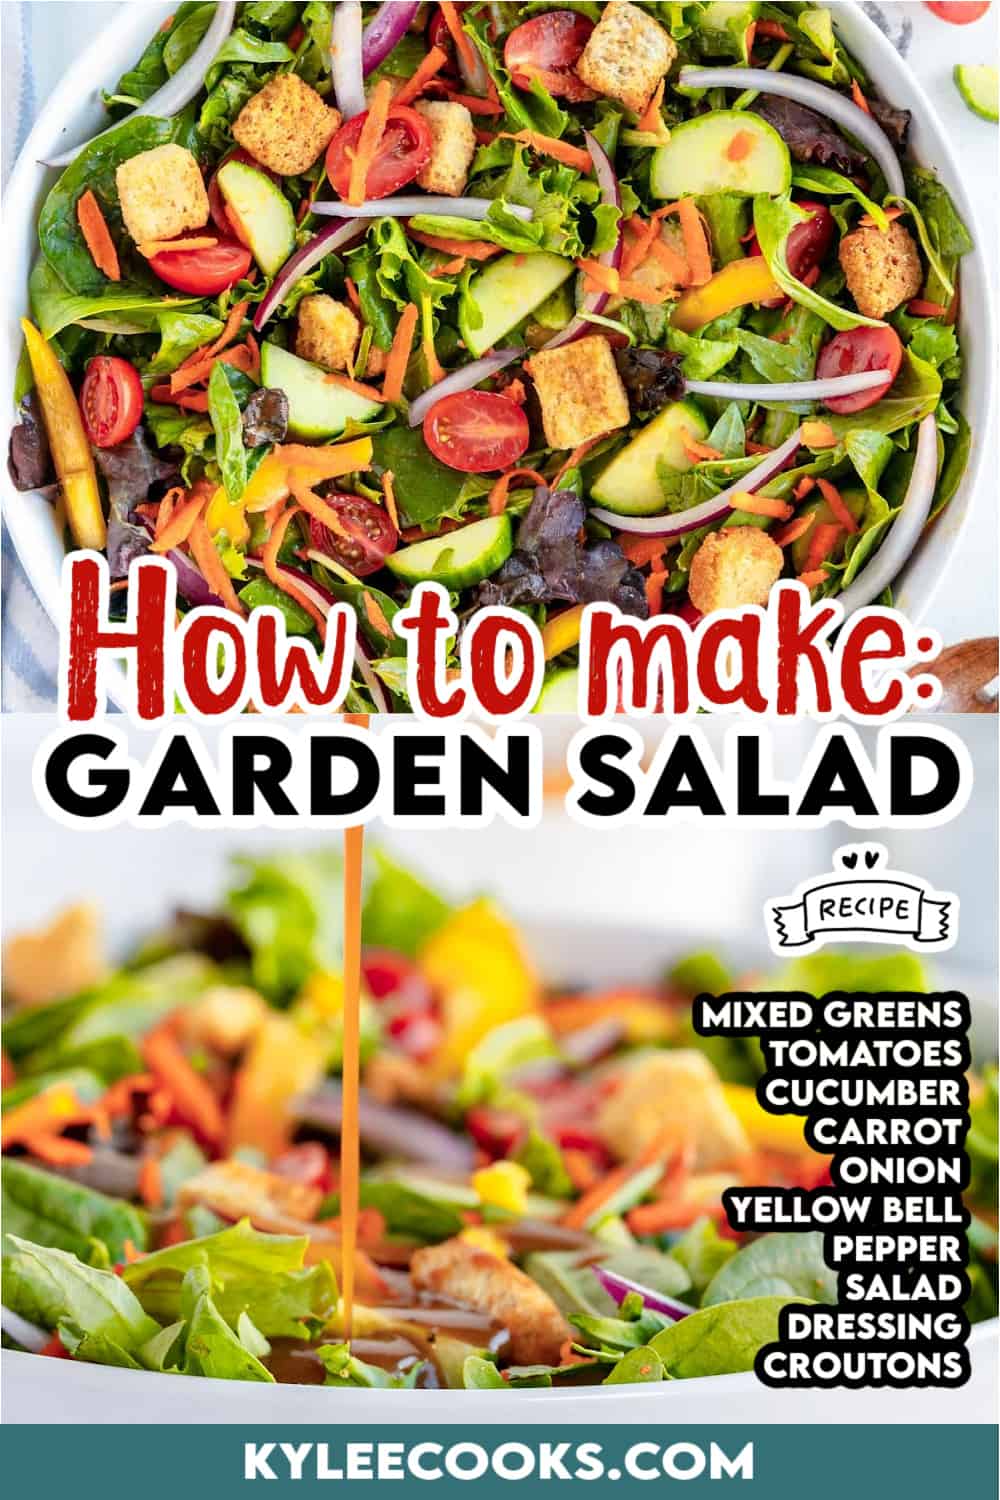 Garden salad with "how to make garden salad" overlaid in text.